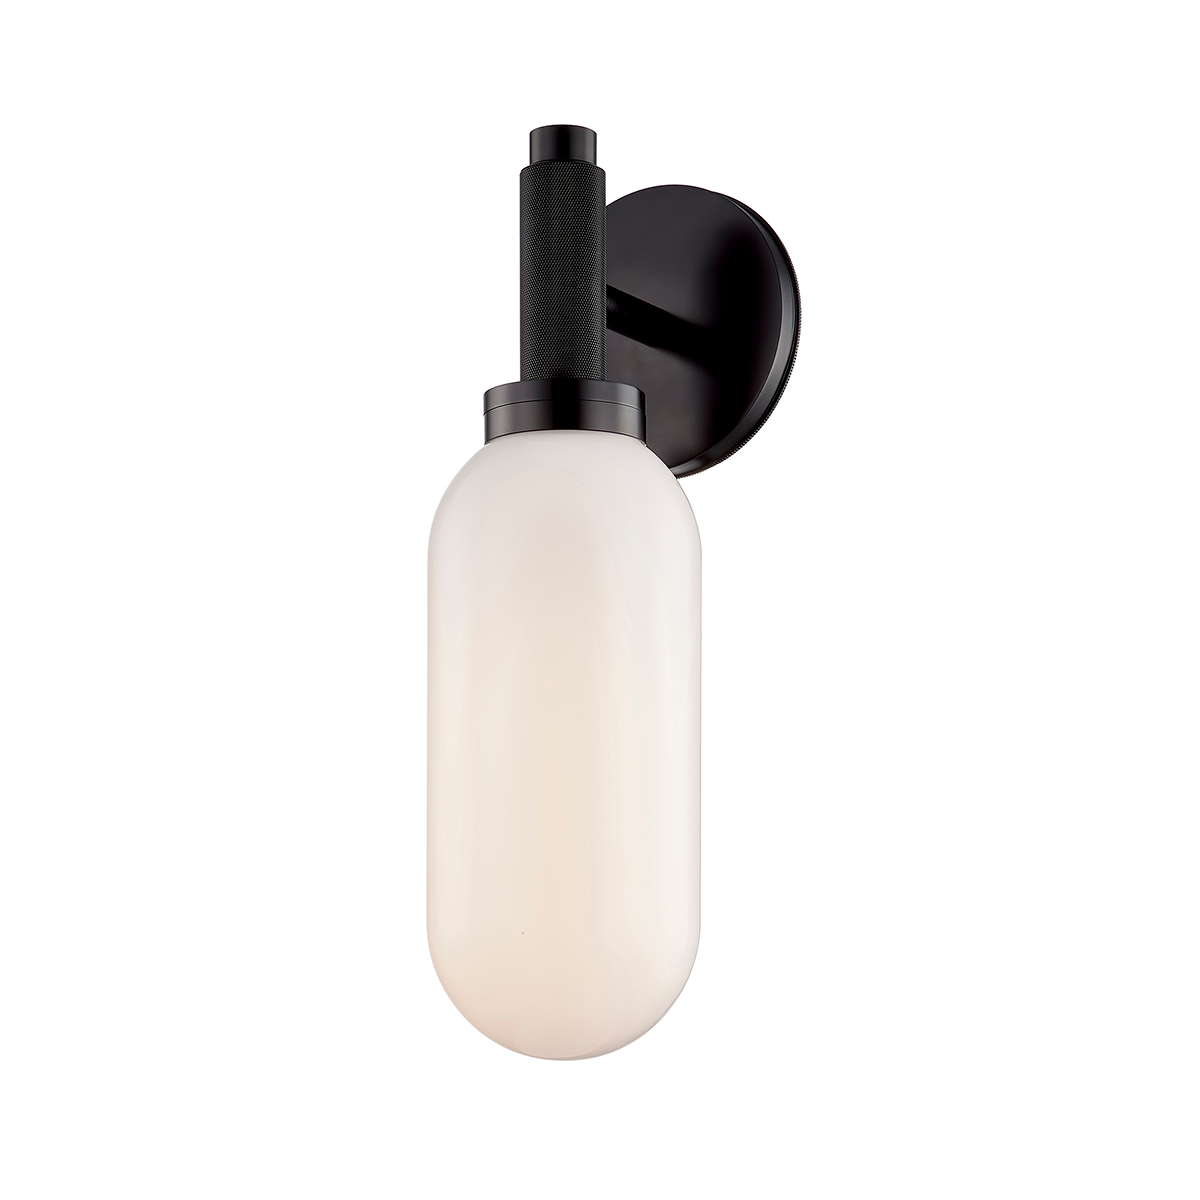 Troy Lighting Annex Wall Sconce